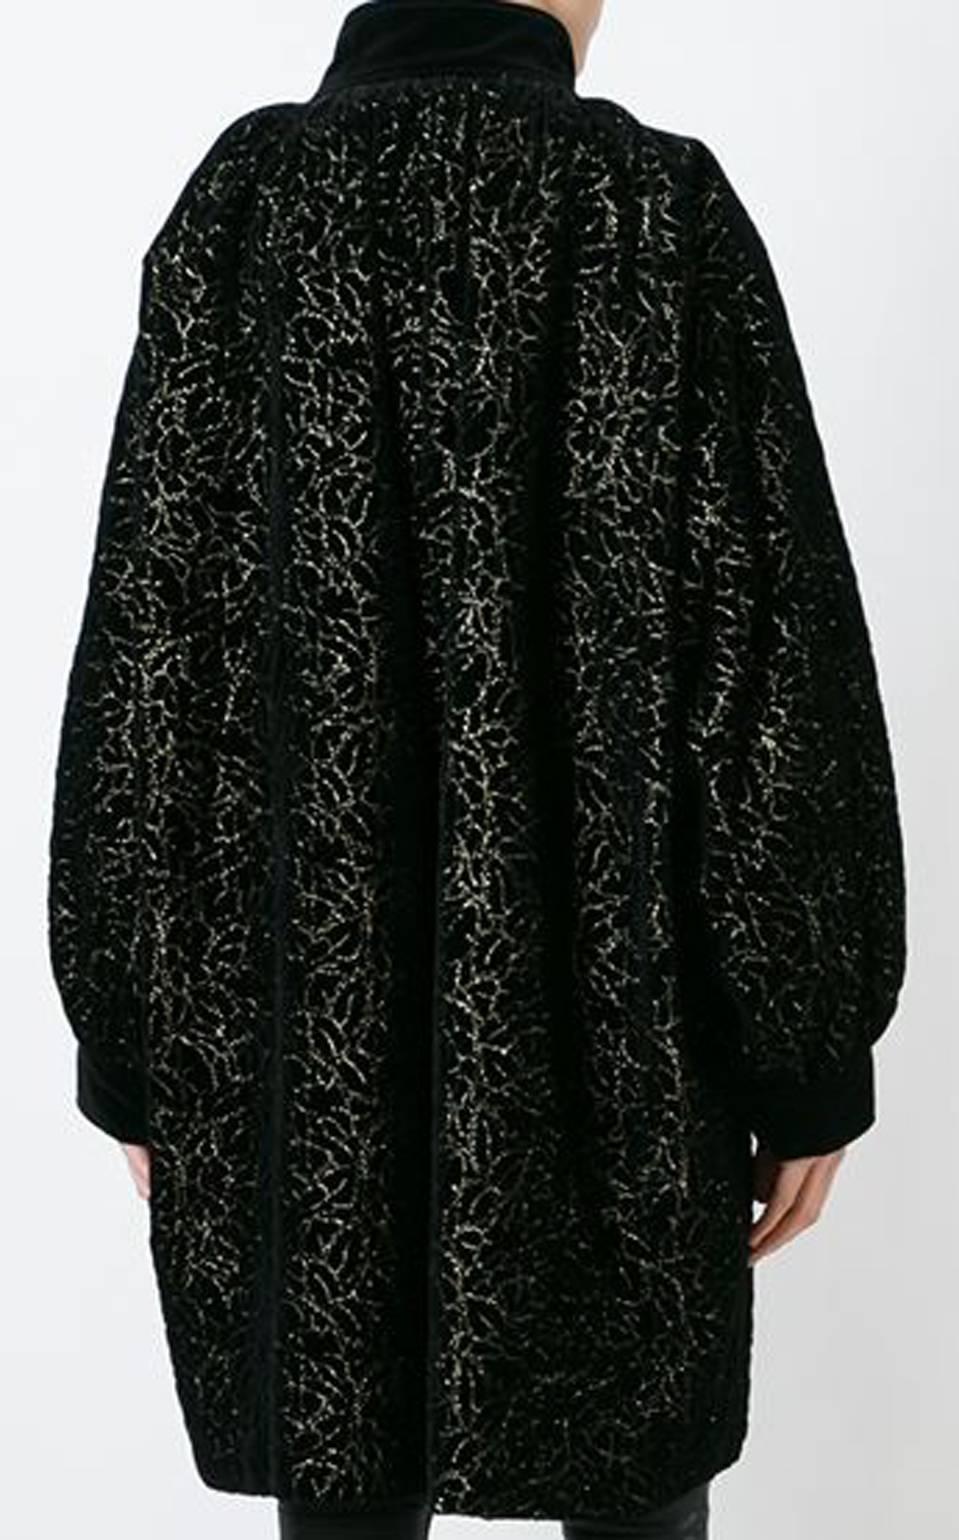 Yves Saint Laurent iconic black and gold-tone cotton floral embroidered velvet coat featuring an oversize cocoon shape, a high standing collar, long sleeves, a front button fastening and side pockets. 
In excellent vintage condition. Made in